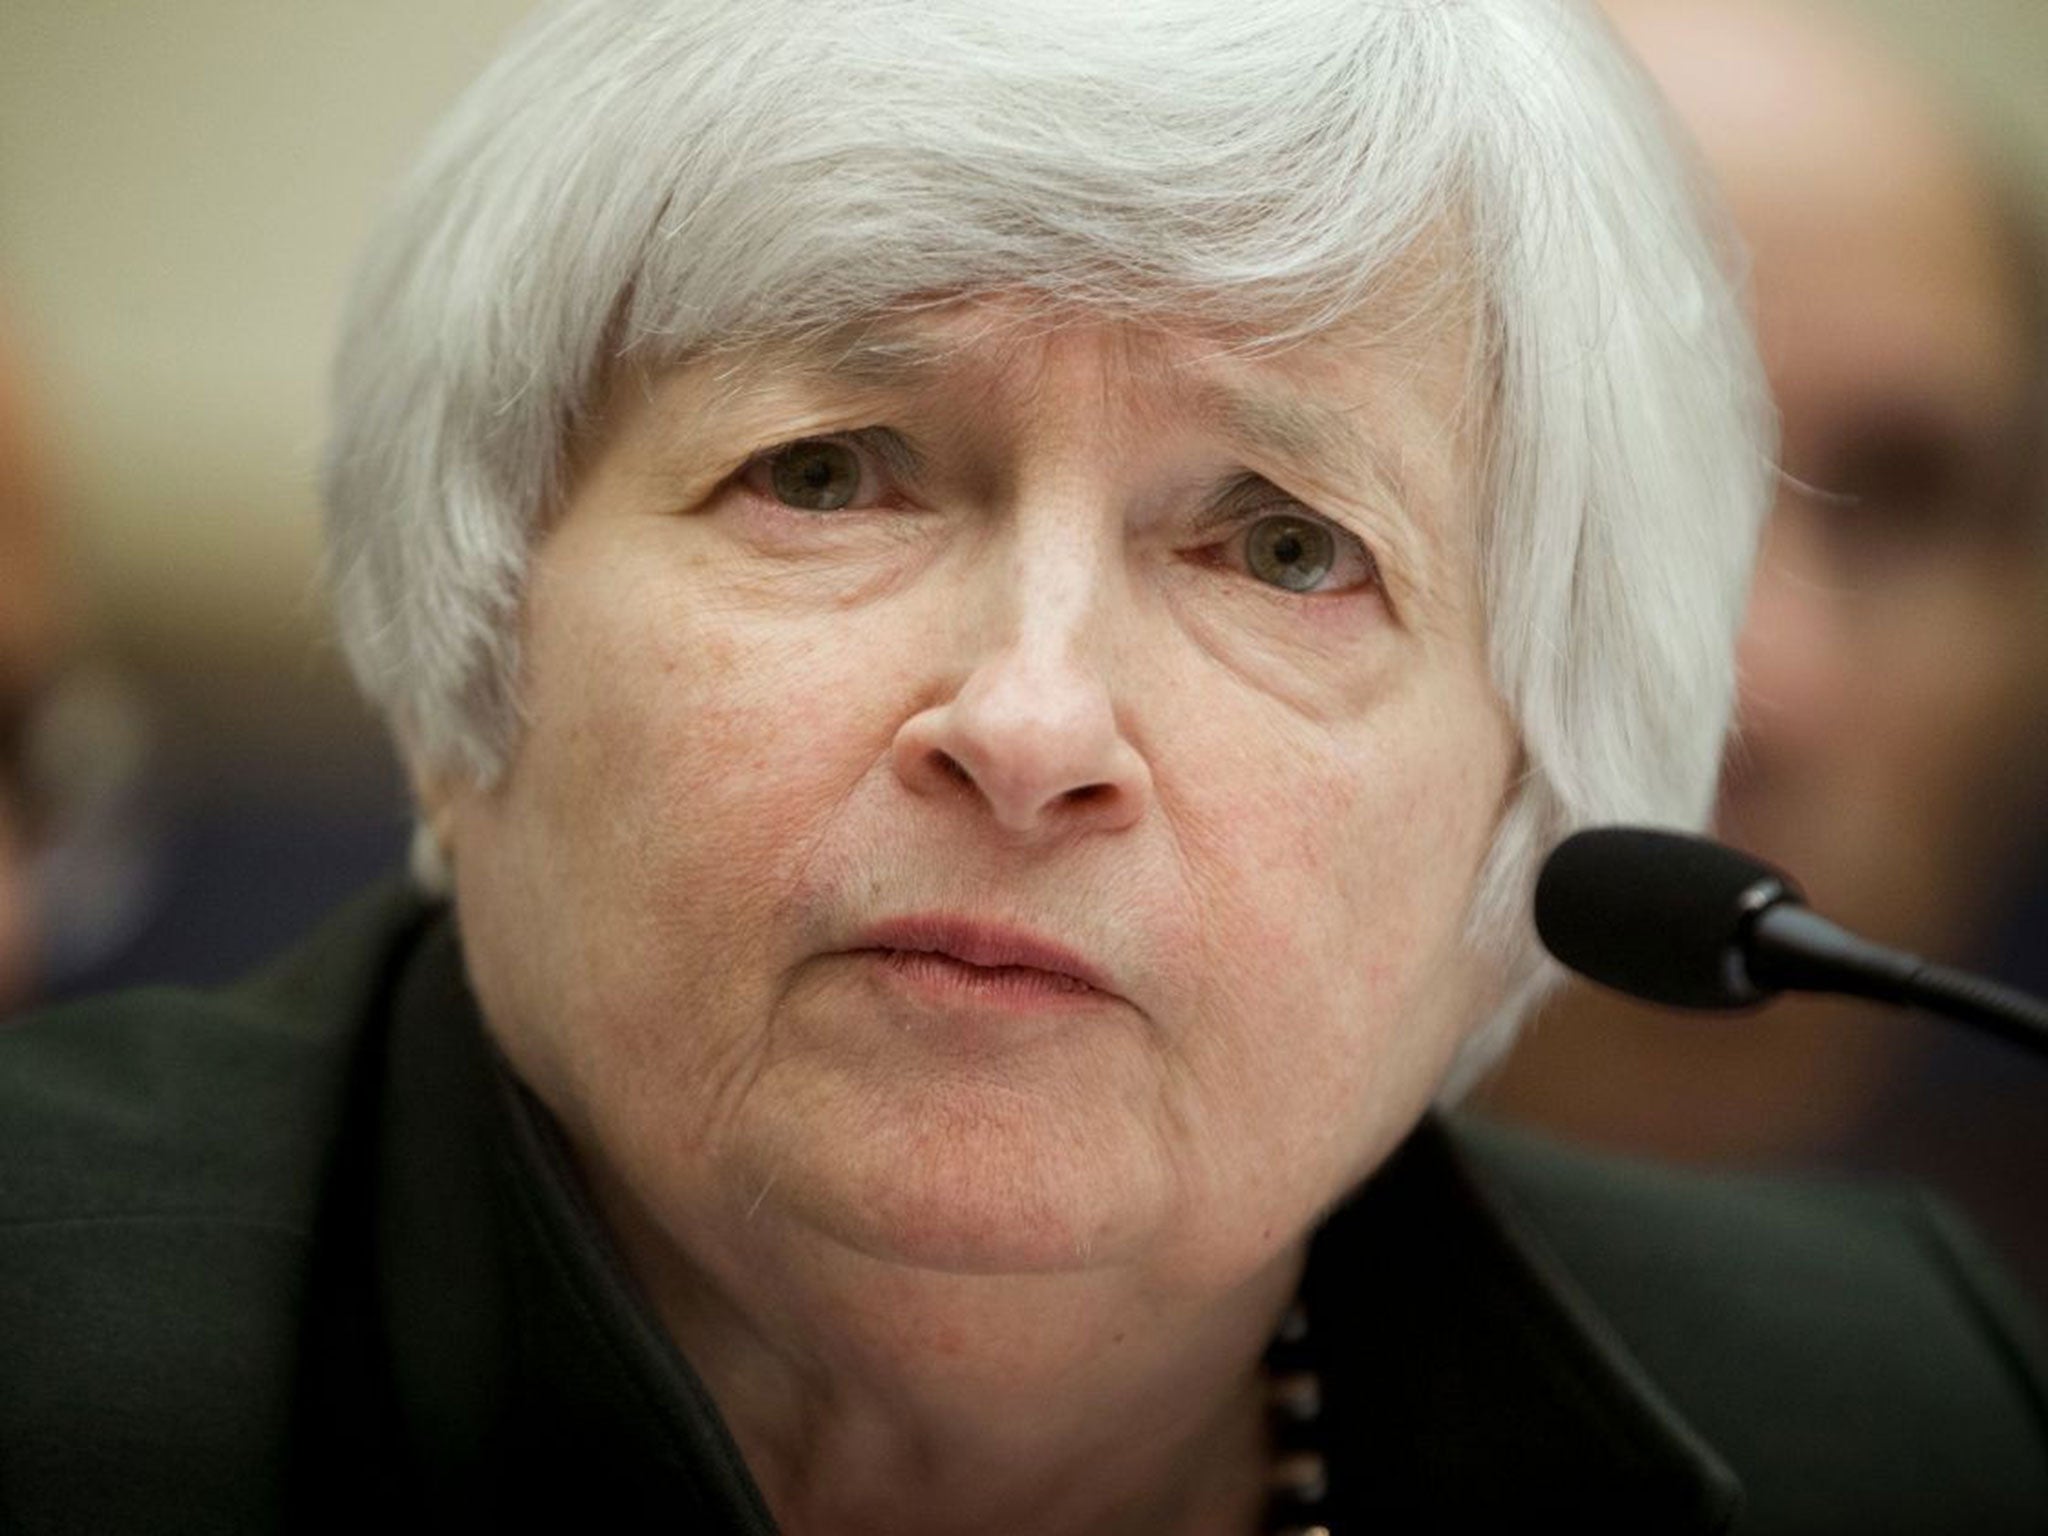 Janet Yellen, chair of the Federal Reserve, told reporters that any decision to raise rates in June would depend on the data as it is made available to the rate-setting Federal Open Market Committee.